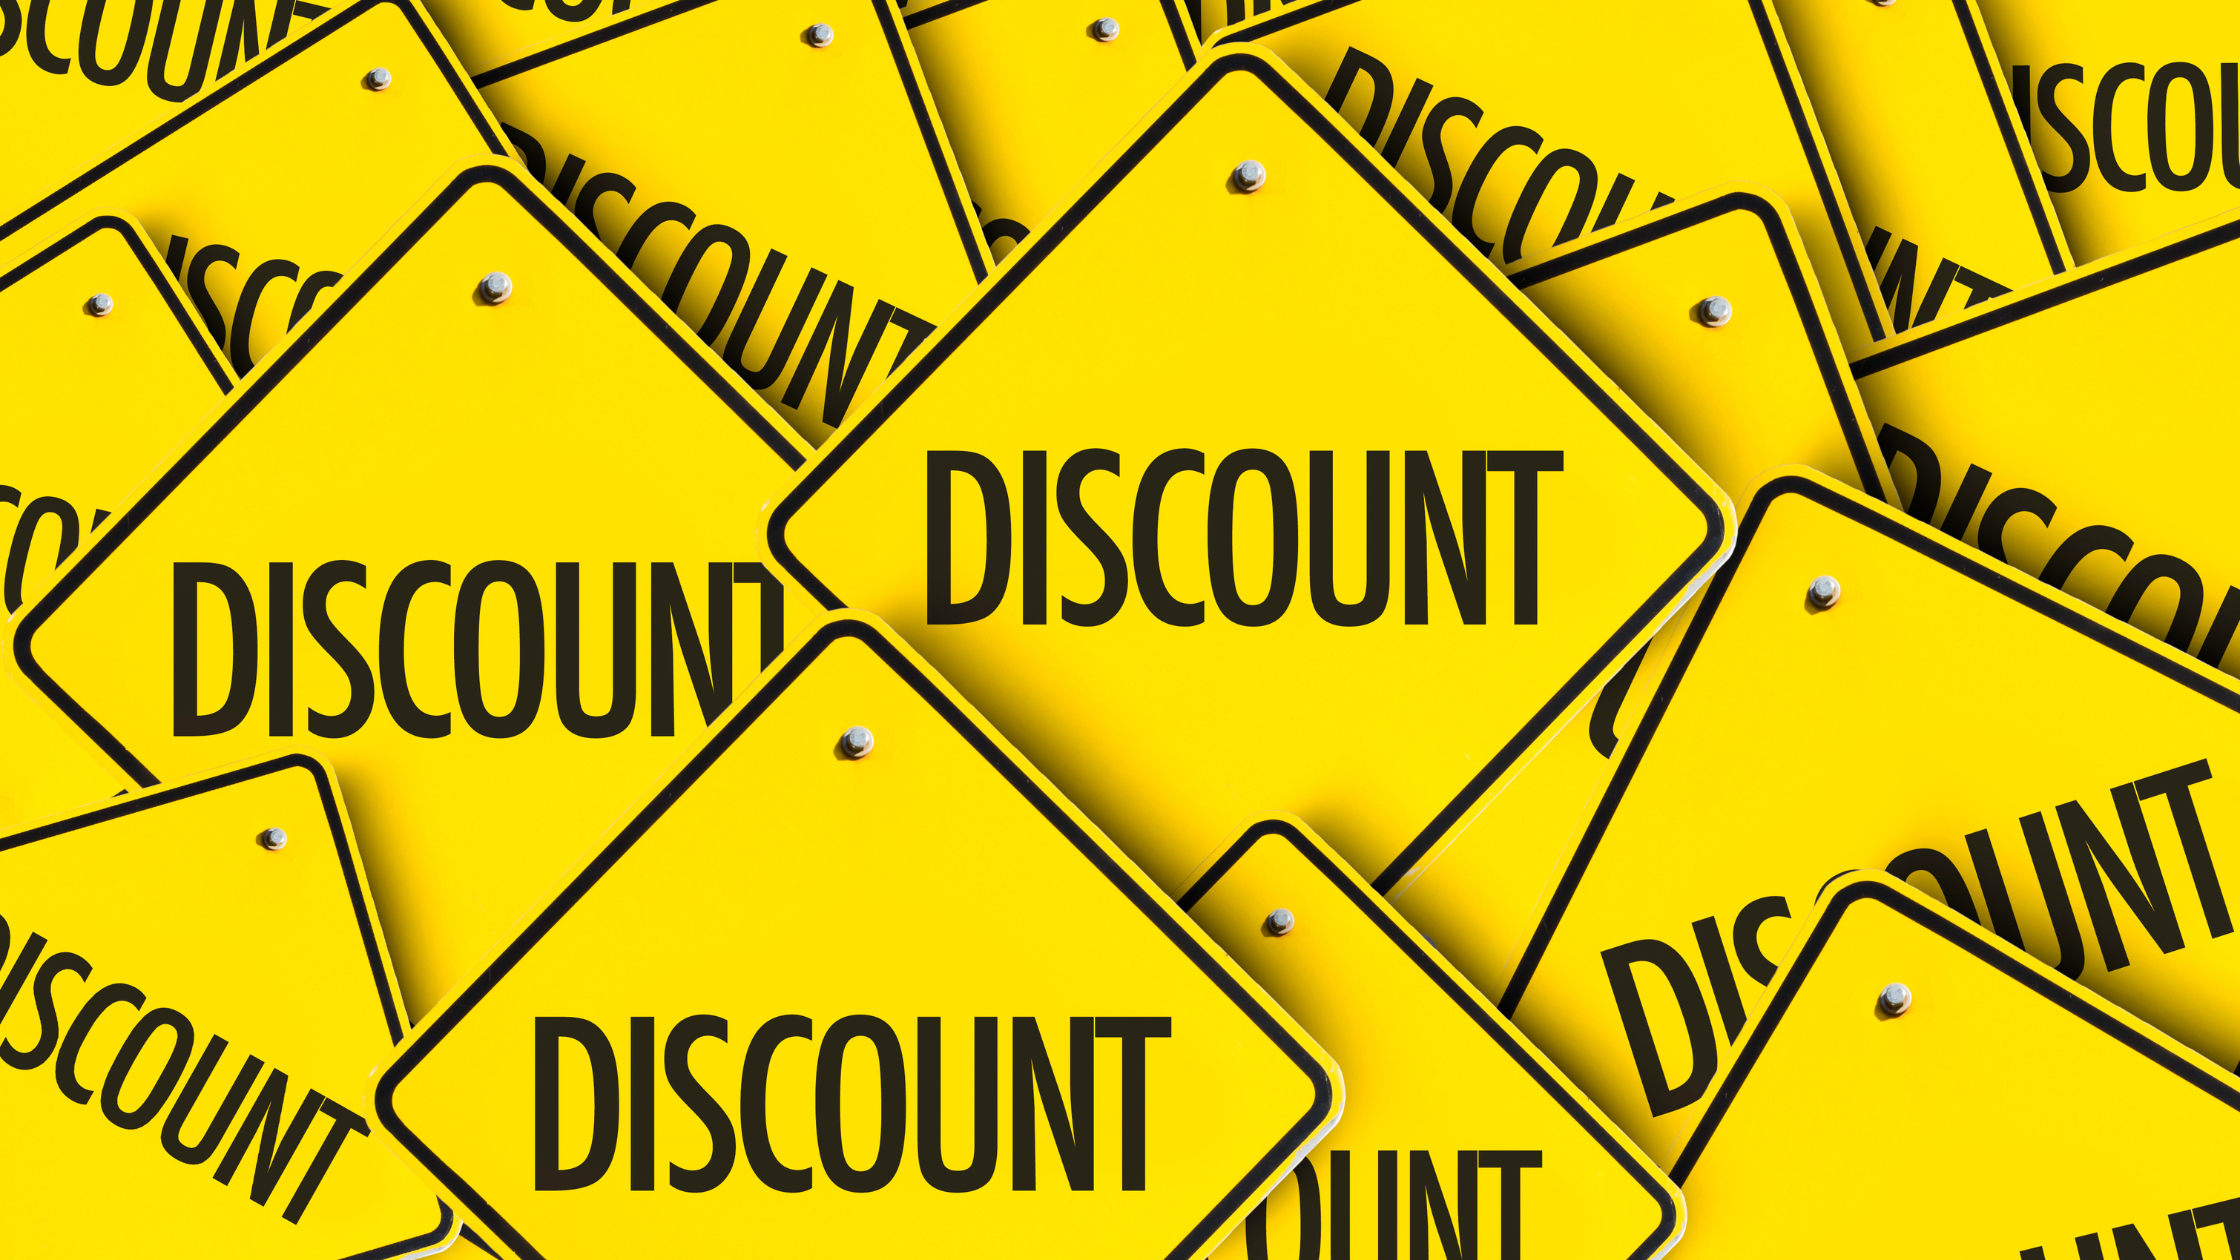 Getting the most out of your discounts